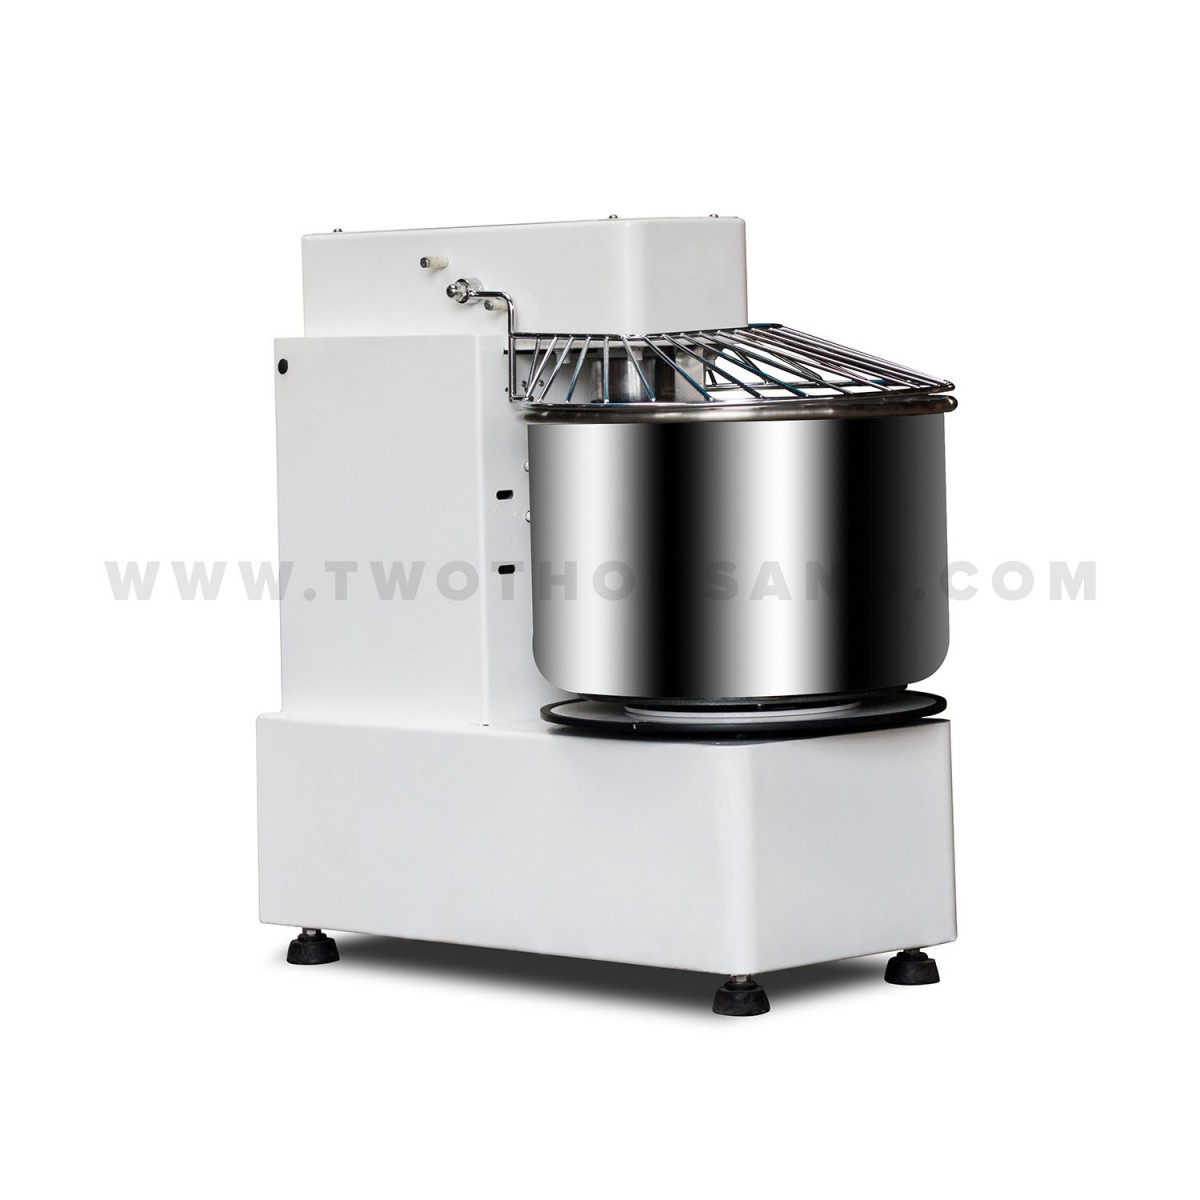 https://media.twothousand.com/catalog/product/cache/1/image/1200x/040ec09b1e35df139433887a97daa66f/s/p/spiral_dough_mixer_with_raising_head_and_removable_hs20t_hs30t_hs50t_-_4.jpg